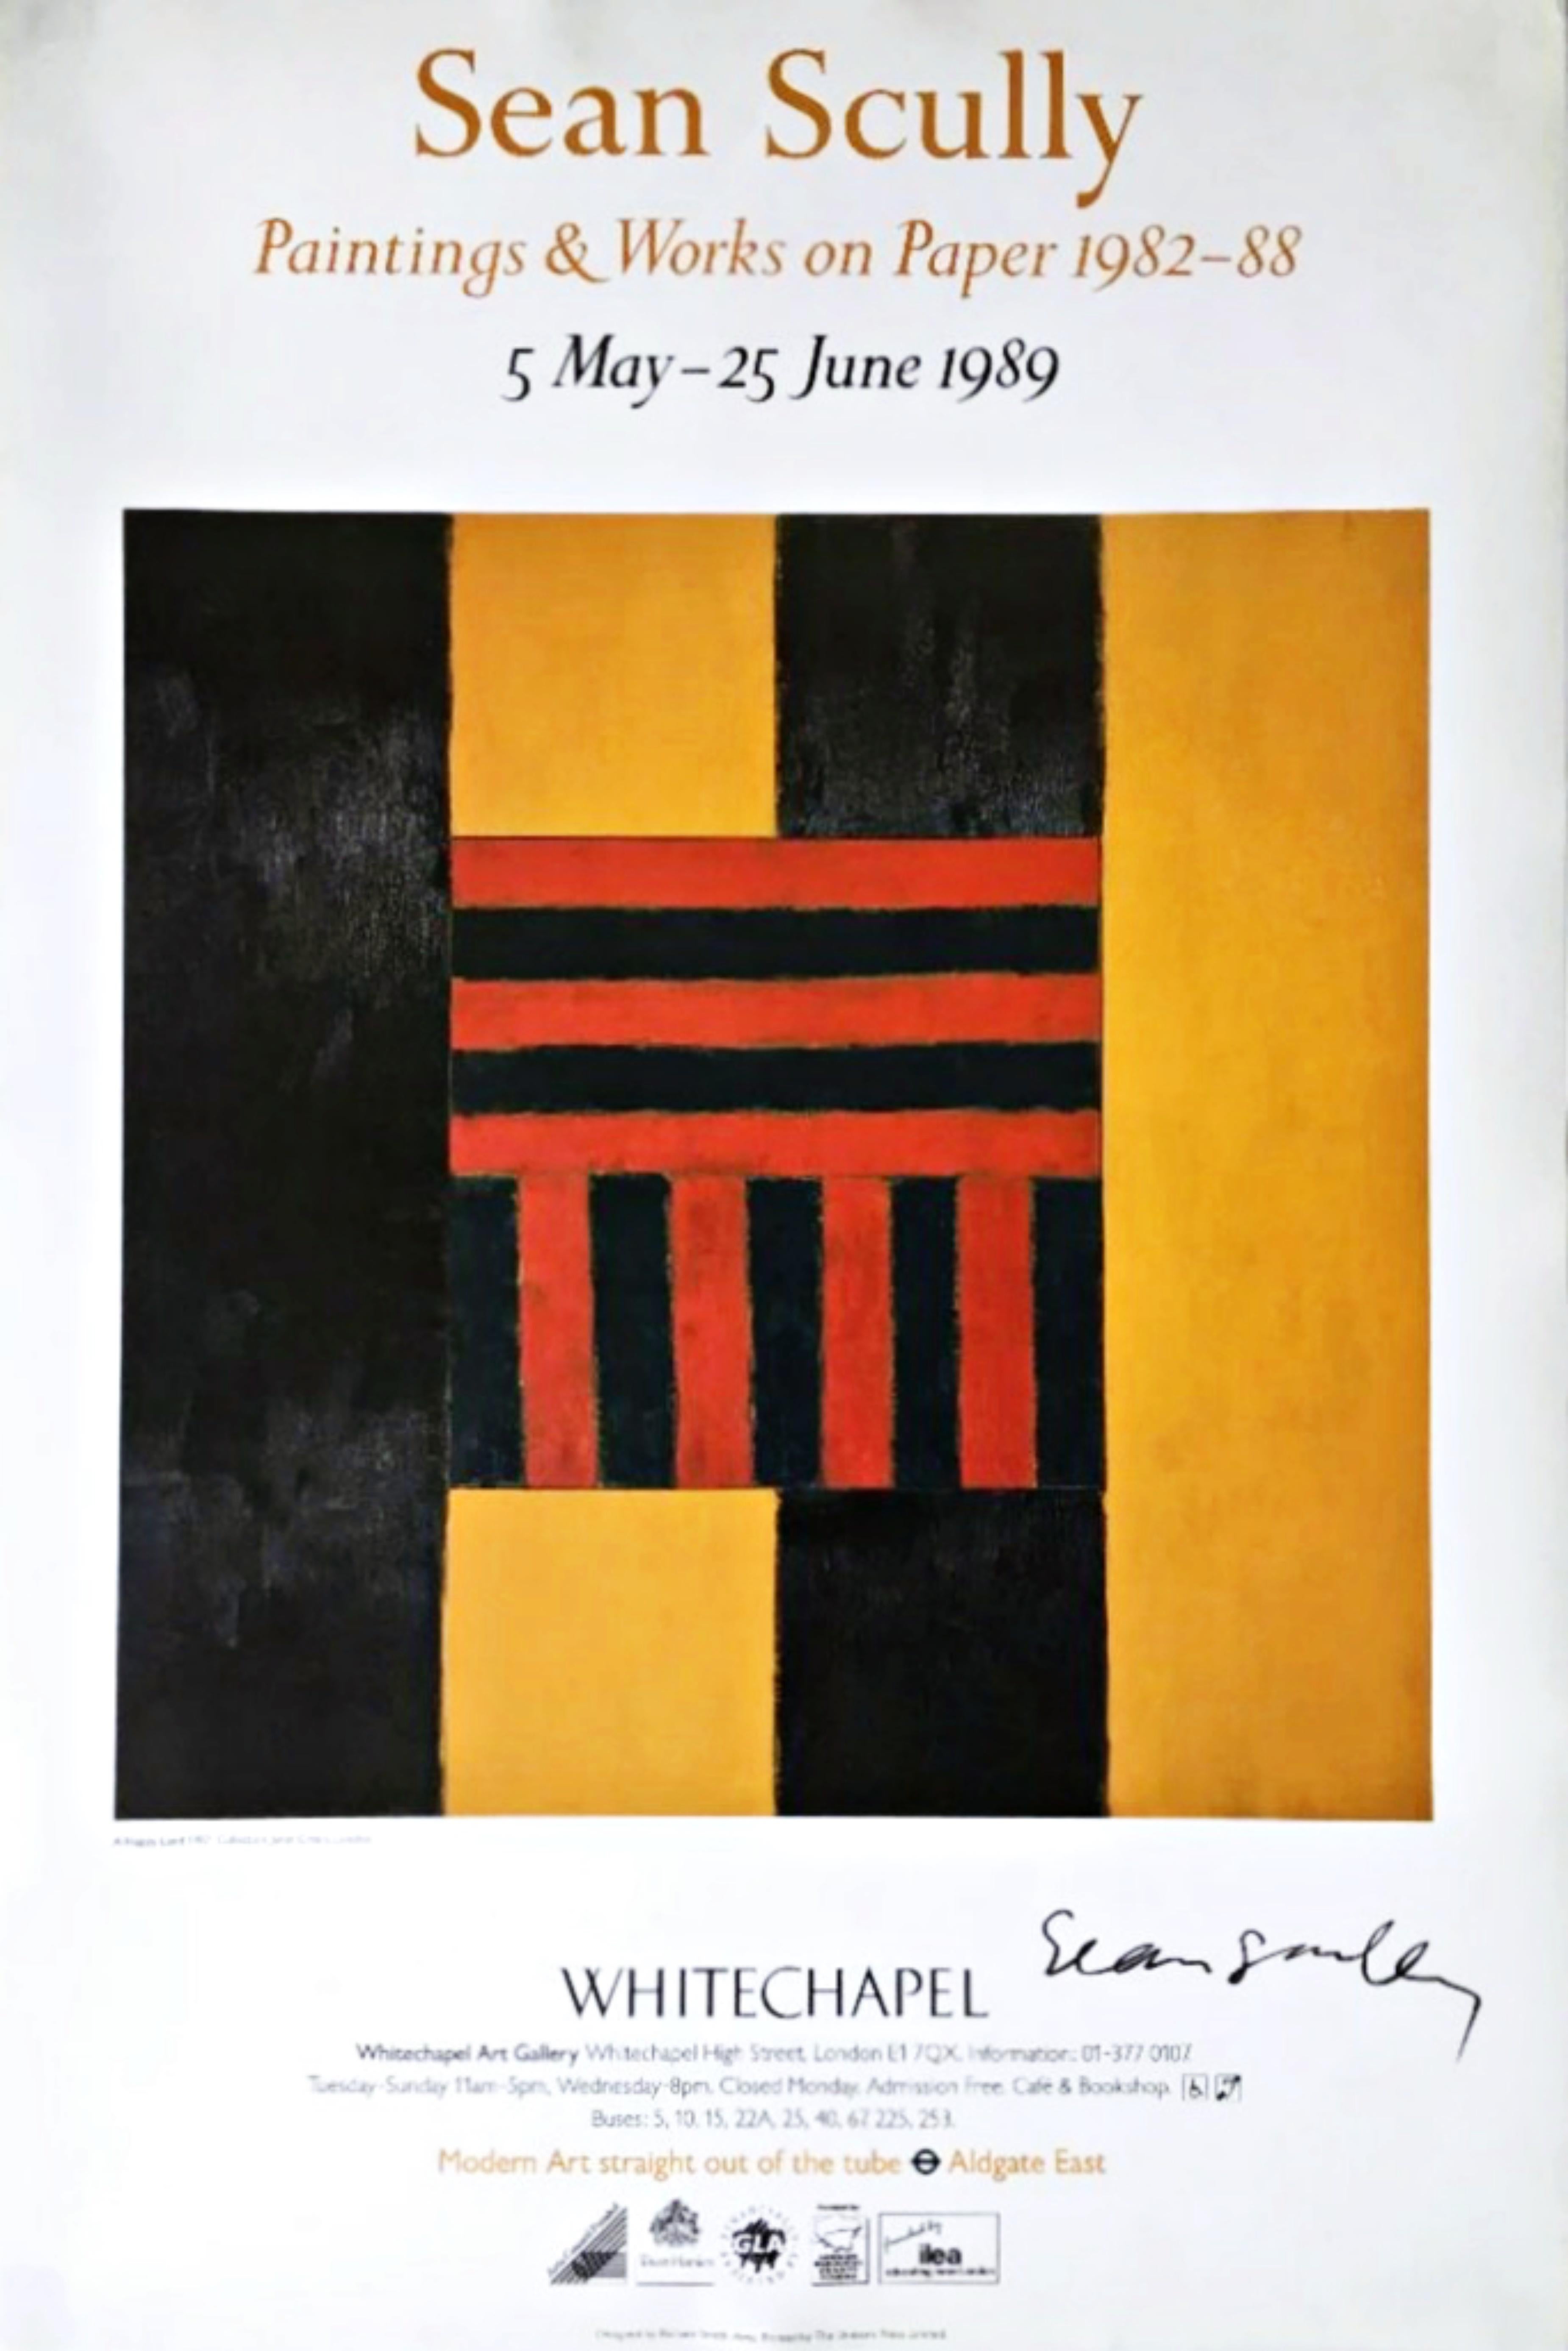 Sean Scully Abstract Print - Painting & Works on Paper exhibition poster, Whitechapel Gallery (Hand Signed) 